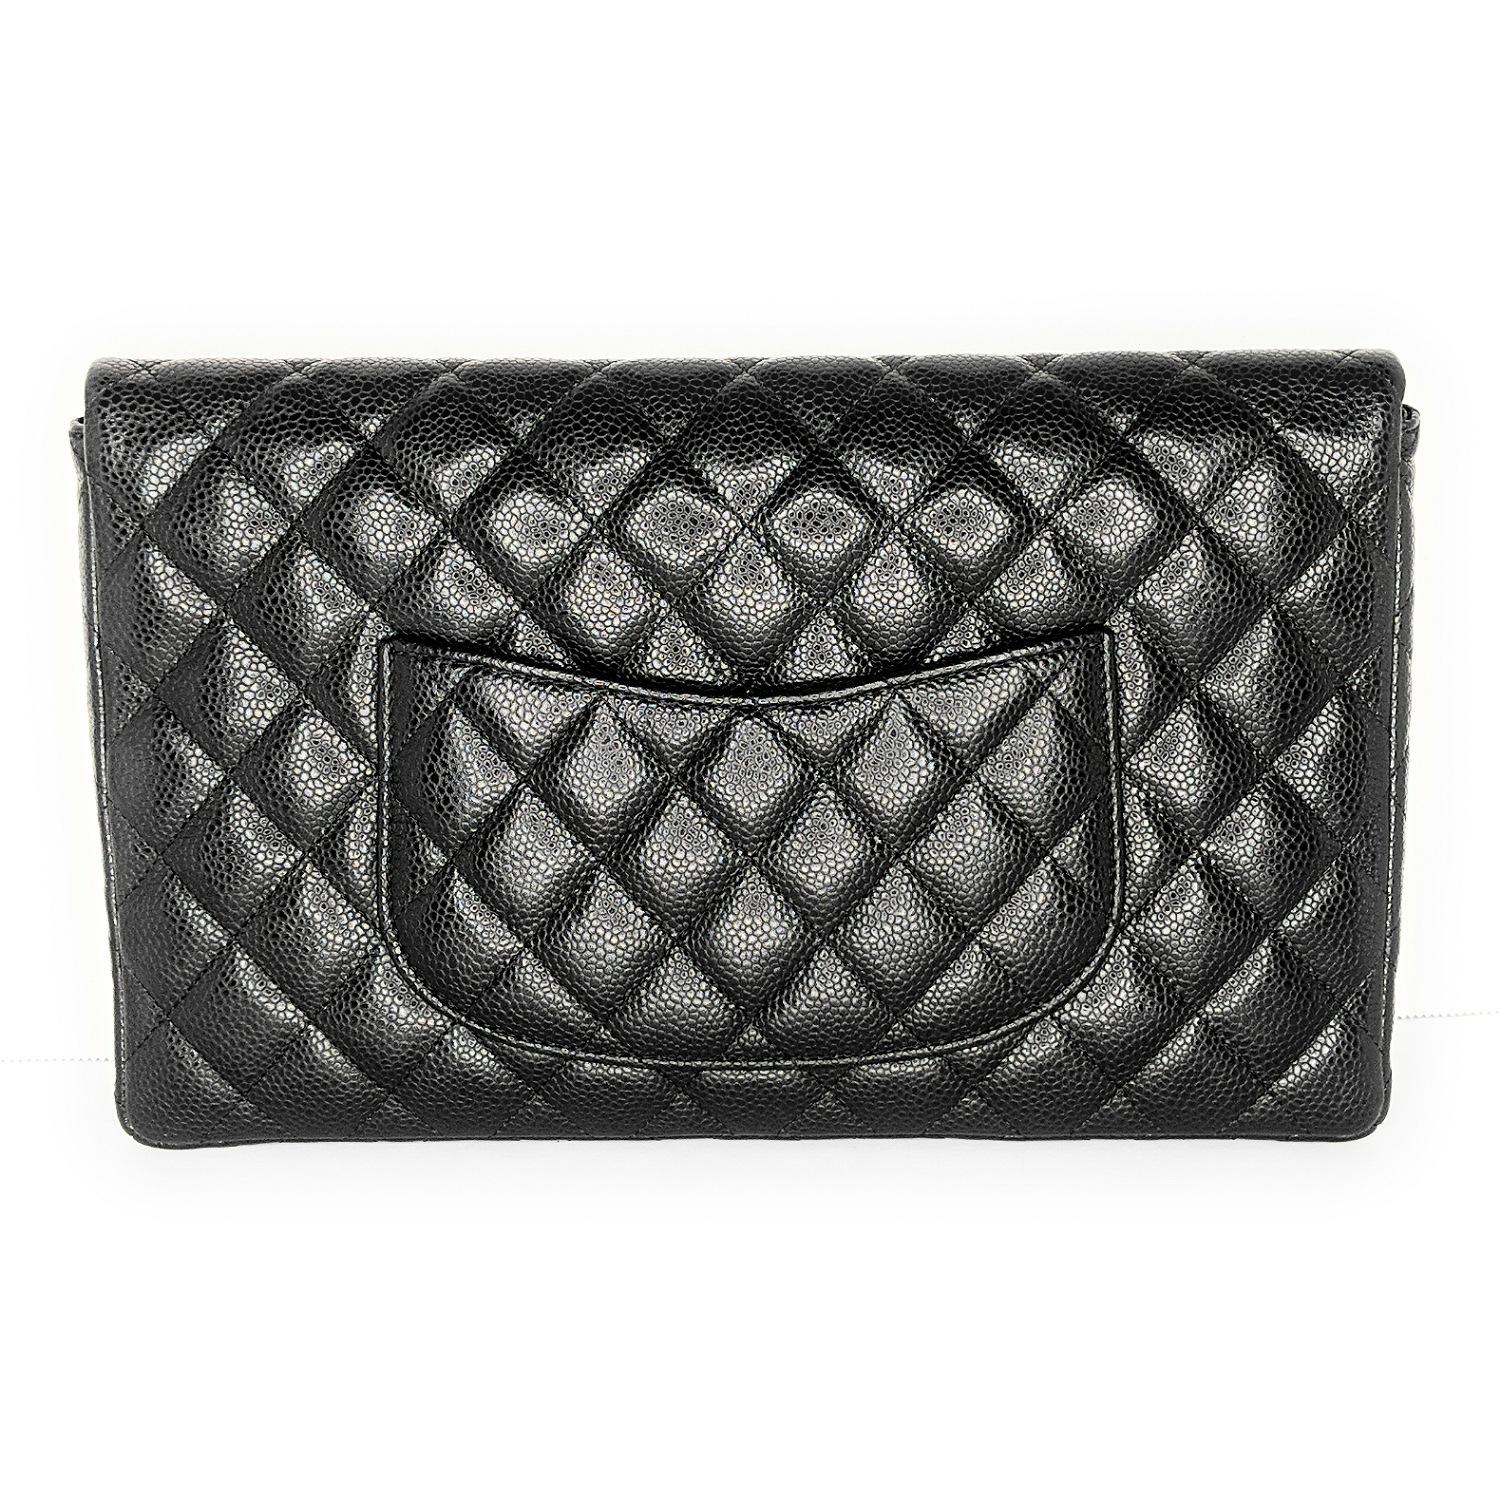 Black quilted leather Chanel Classic Flap clutch with ruthenium hardware, single patch pocket at back, tonal leather lining, single interior zip pocket, and turn-lock closure at front flap featuring CC logo adornment.

Designer: Chanel
Material: